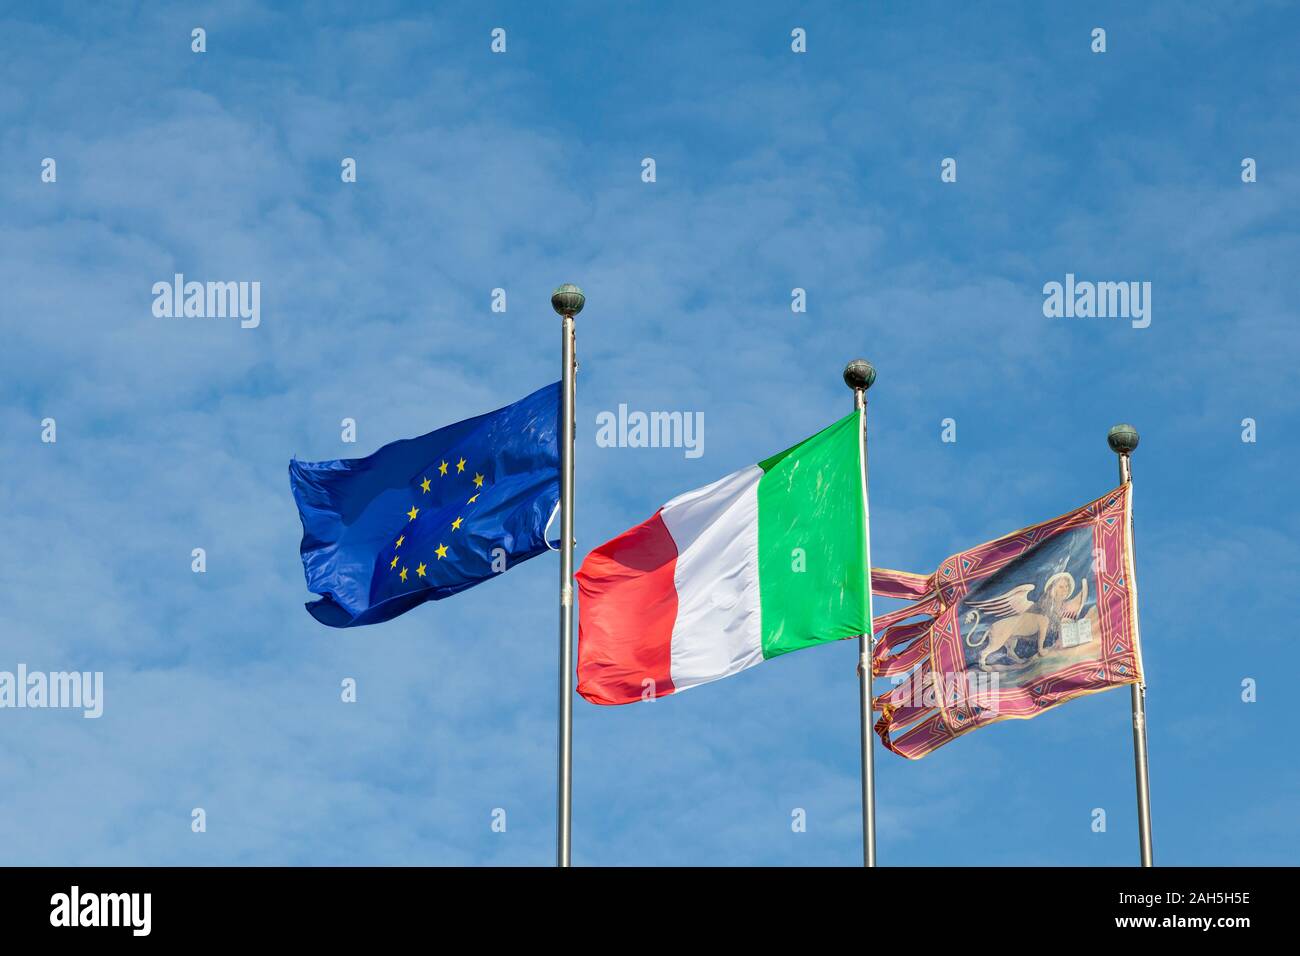 Three flags with the Lion of Venice, Italy and the EU or European Union flying side by side from flagpoles  against a blue sky with copy space Stock Photo